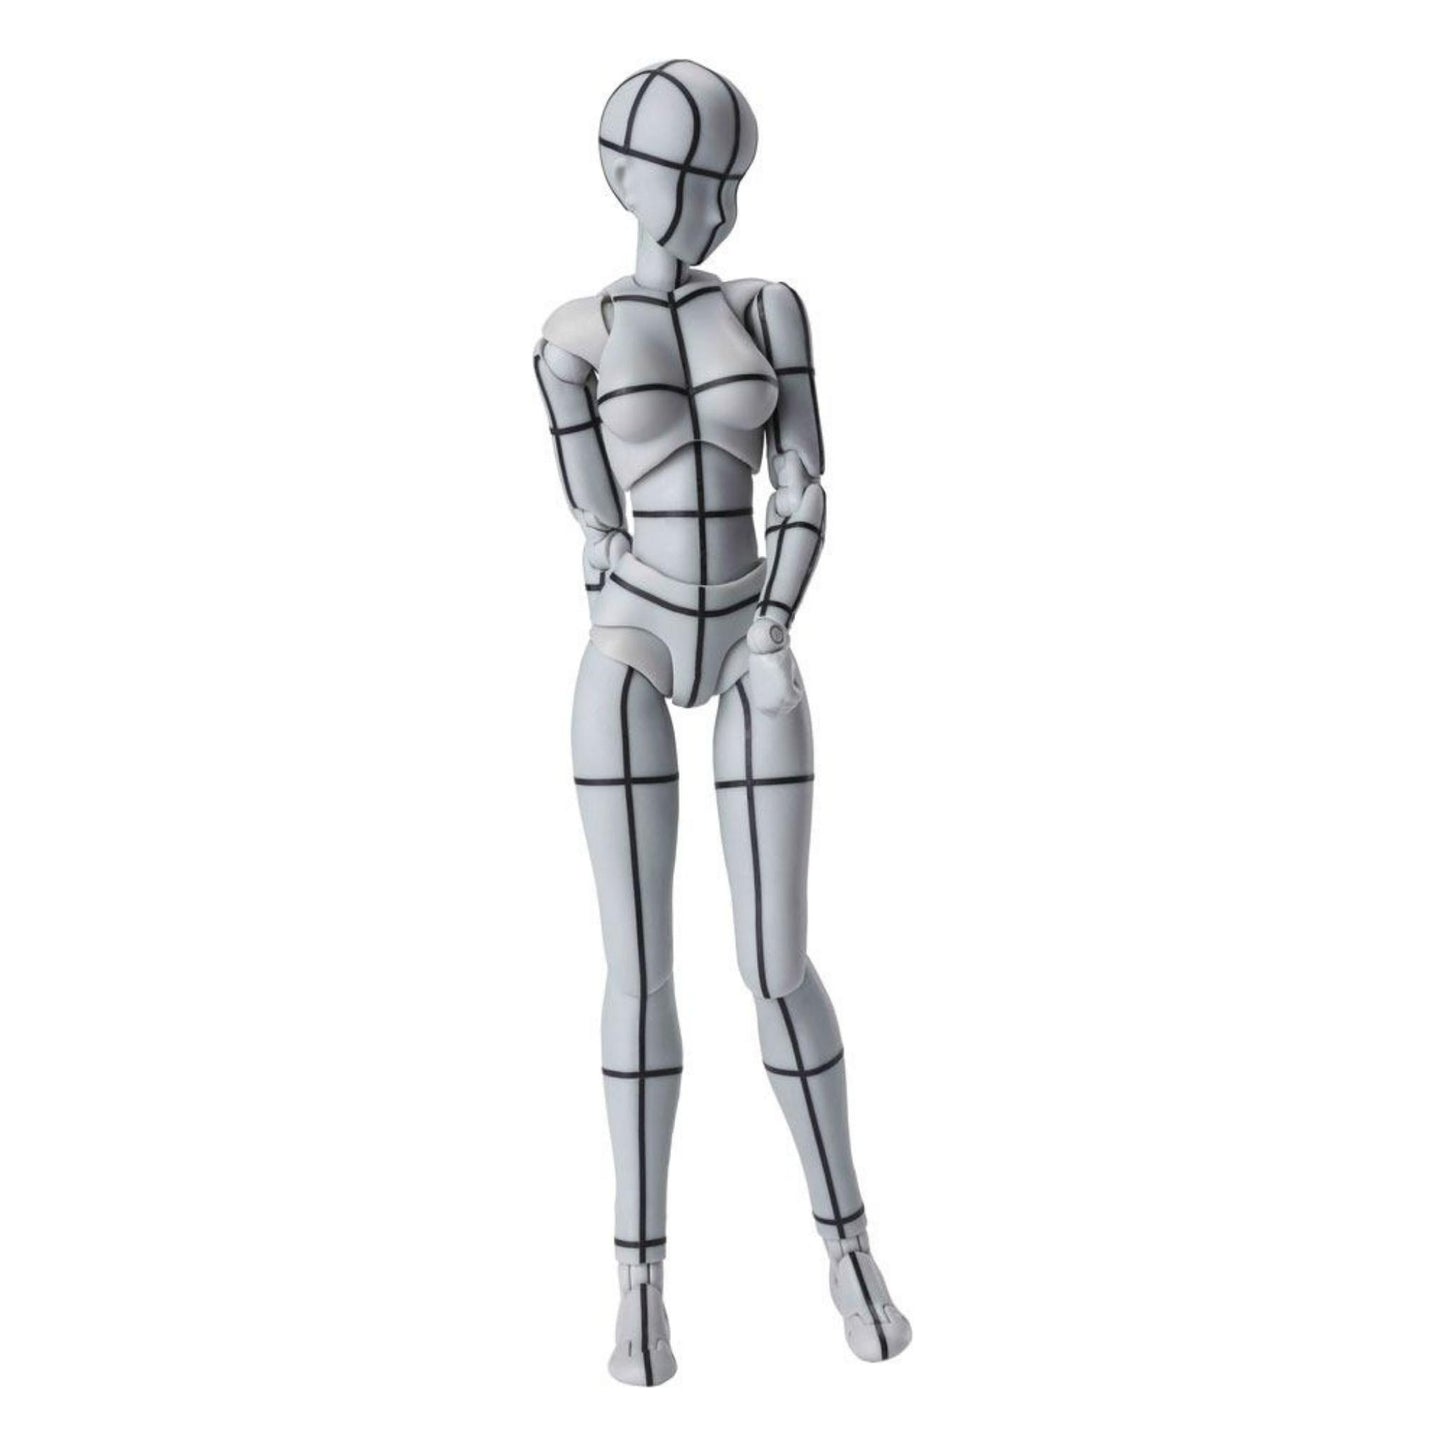 S.H.F. Actionfigur - Body-chan Wireframe Version